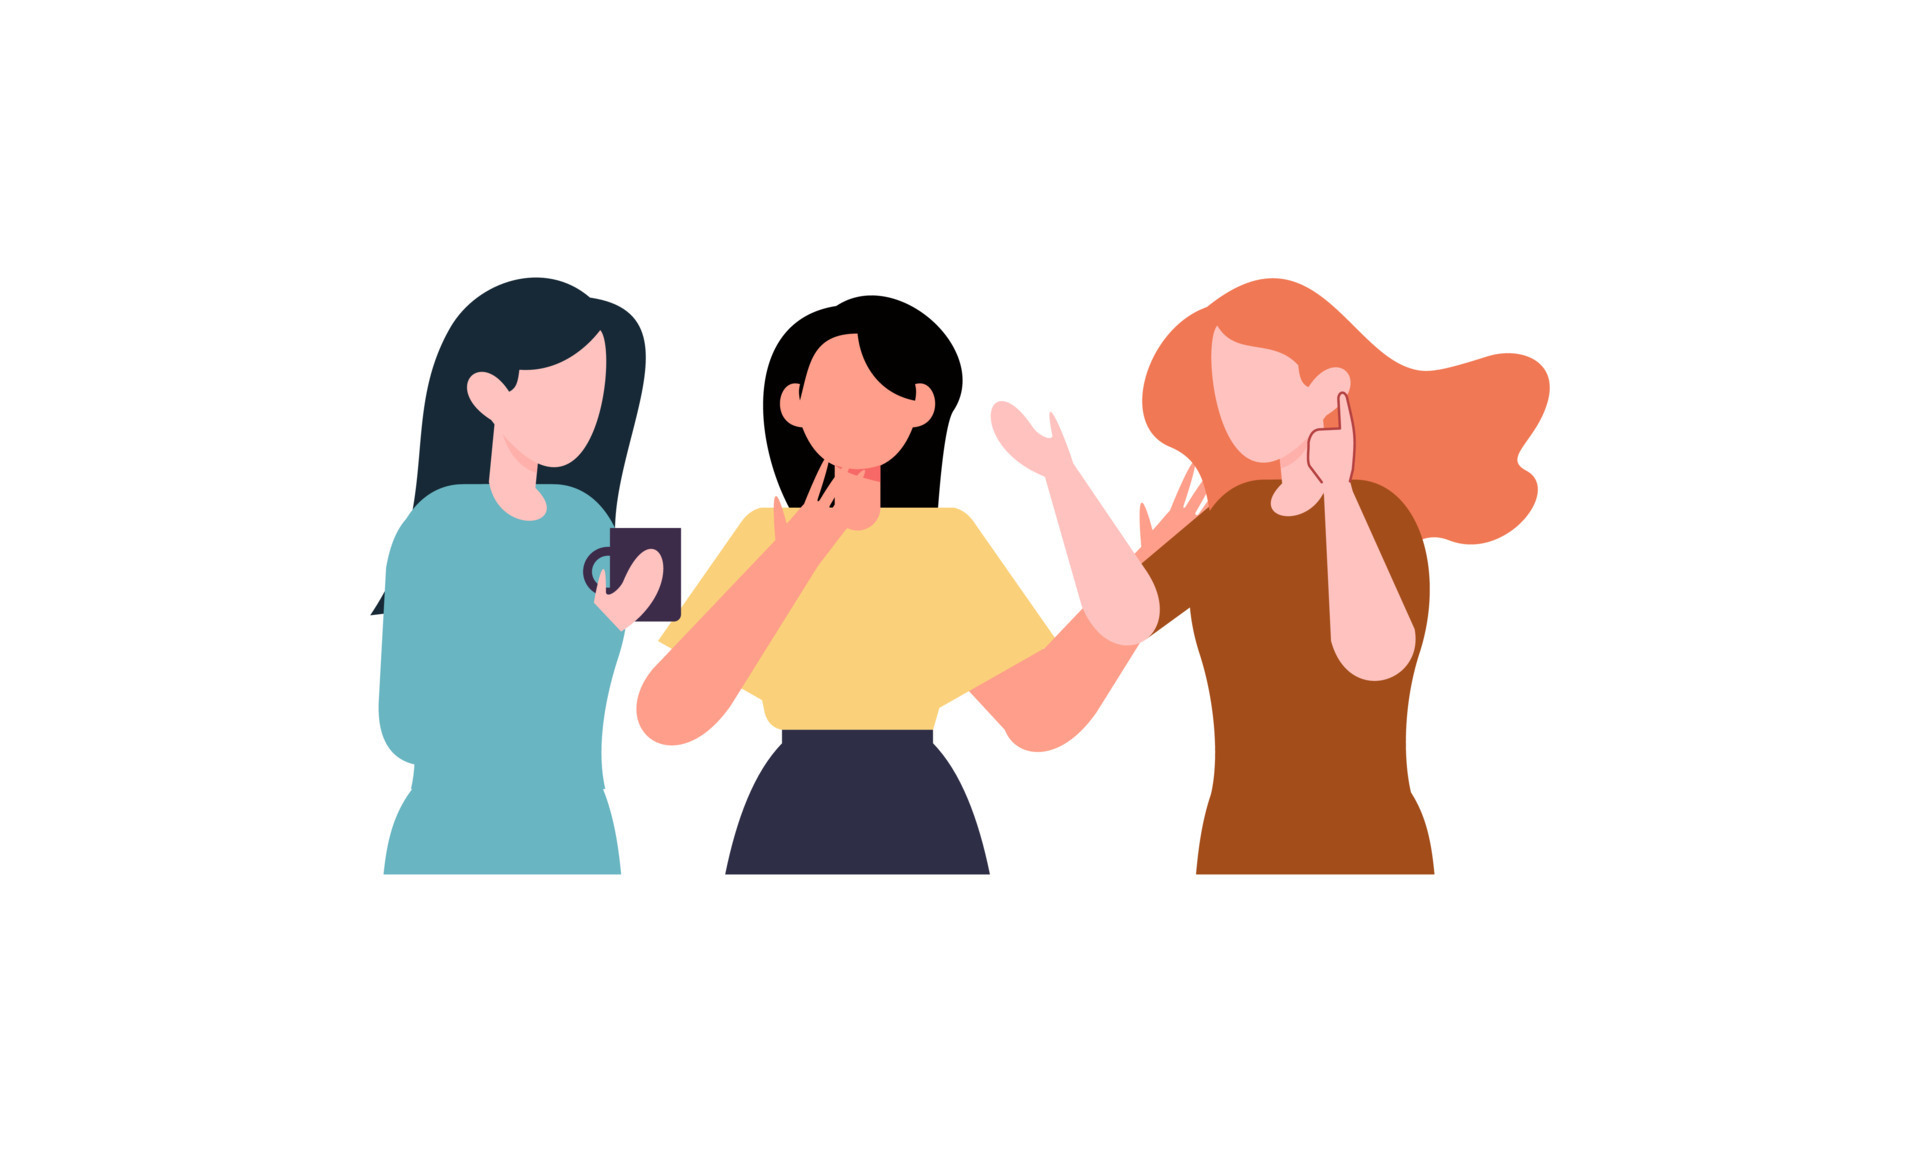 Free Vectors  Let's talk with friends online (girl)